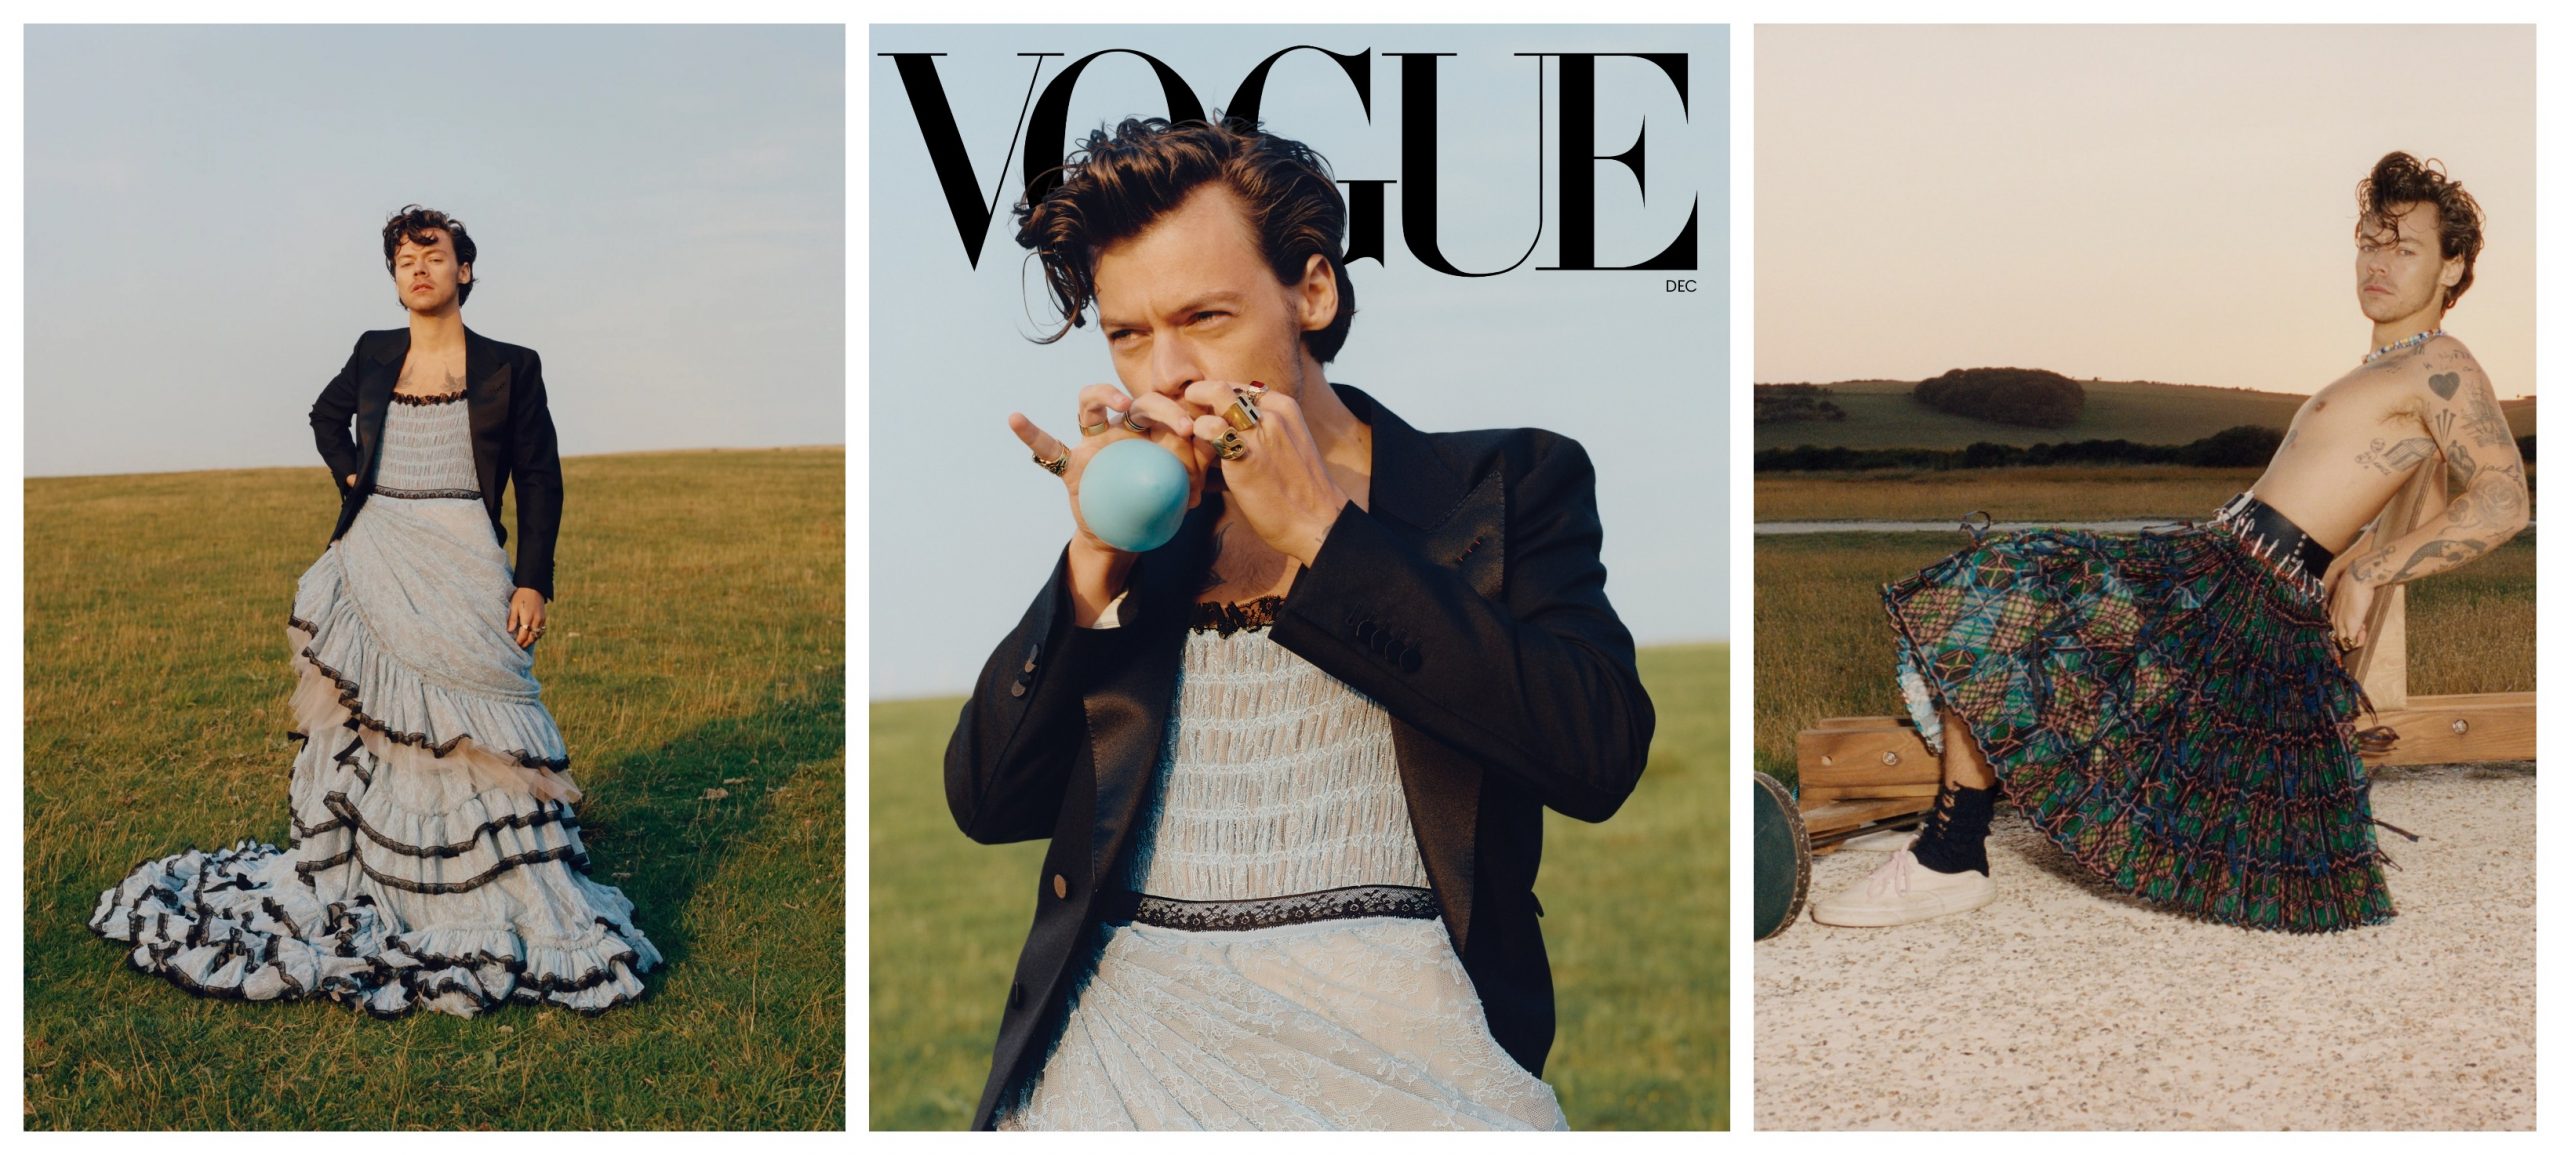 Harry Styles Rocks A Dress For Vogue's December Issue - That Grape Juice